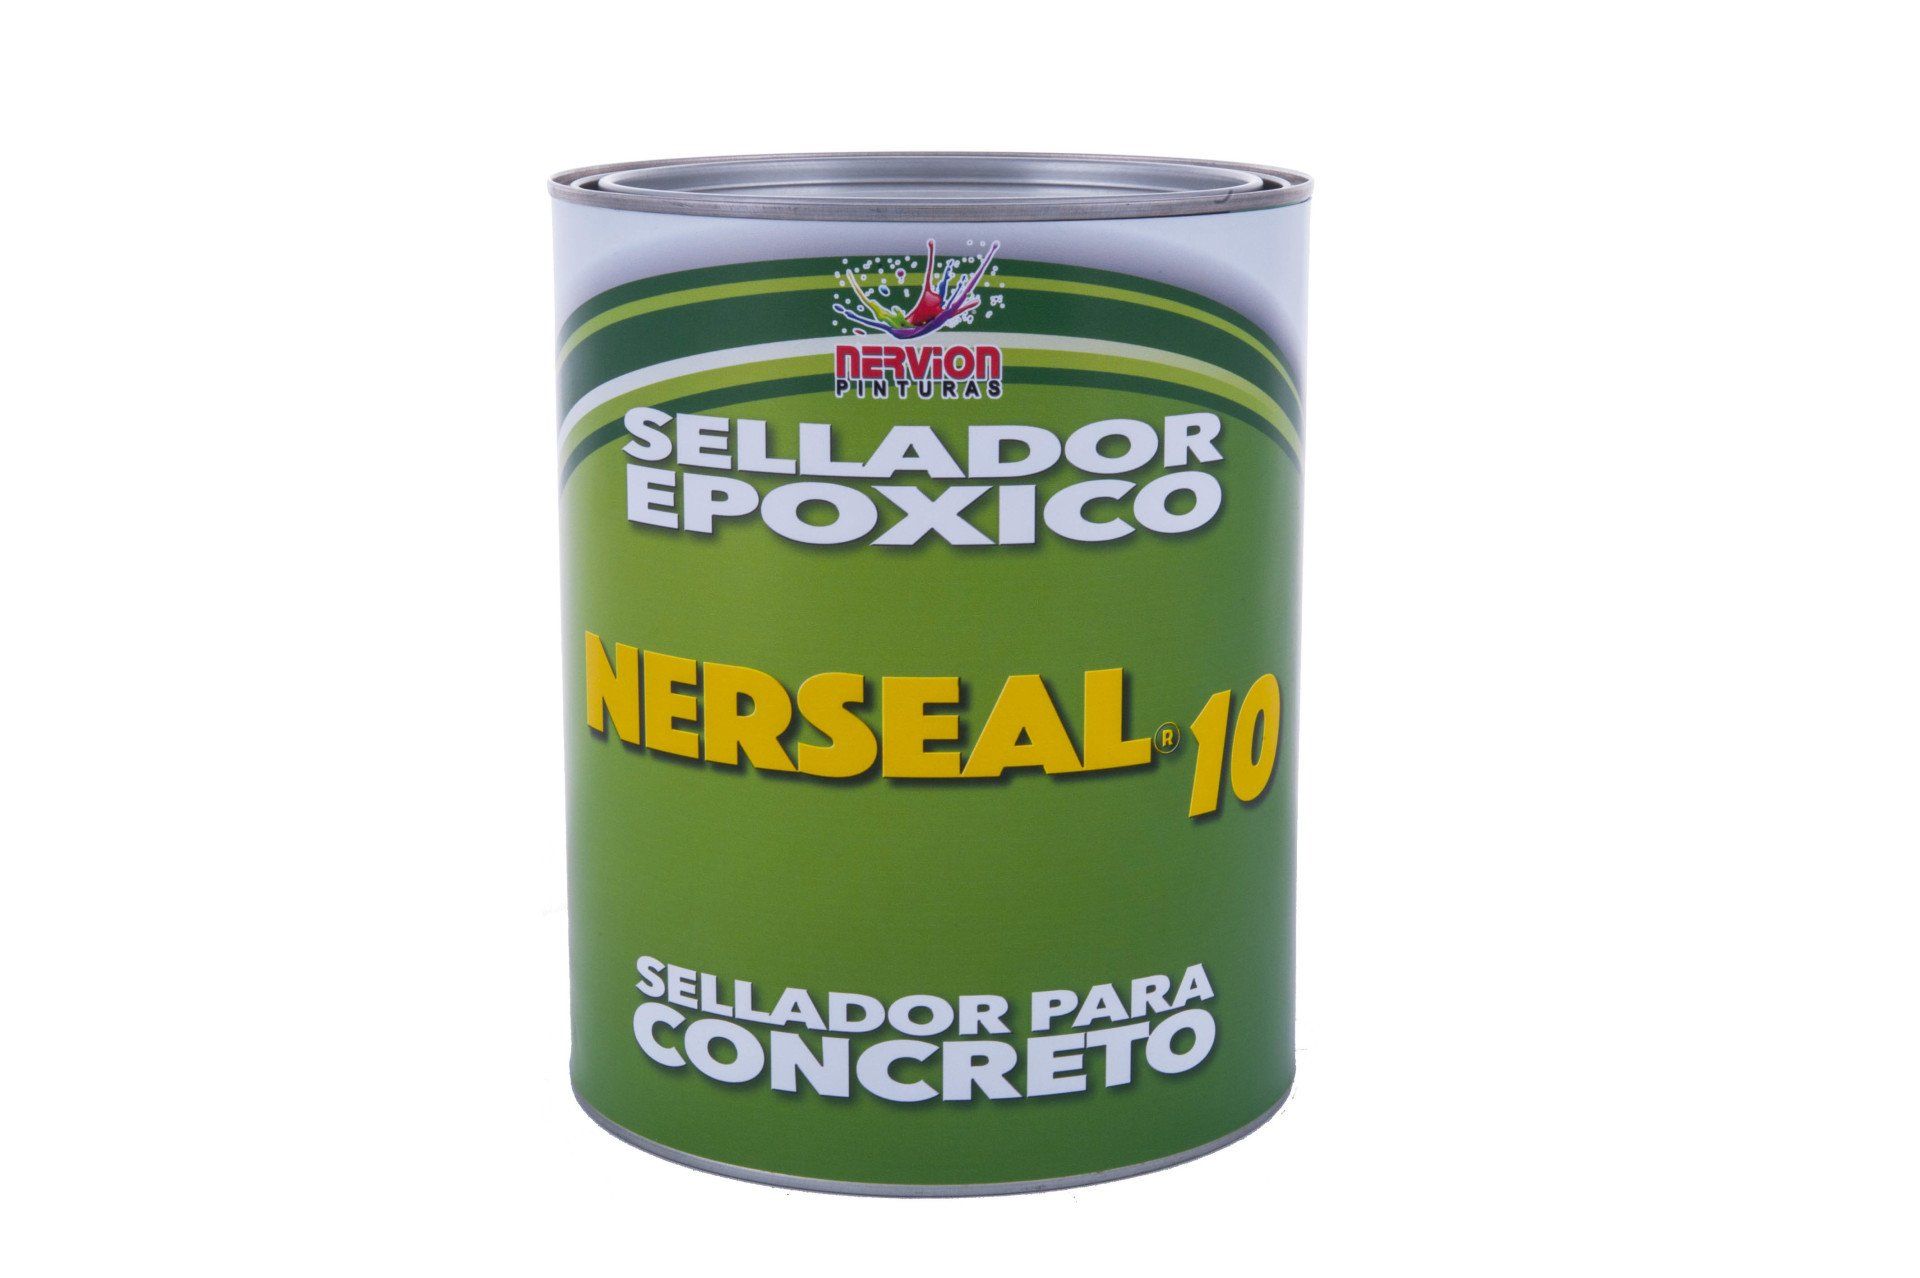 NERSEAL 10